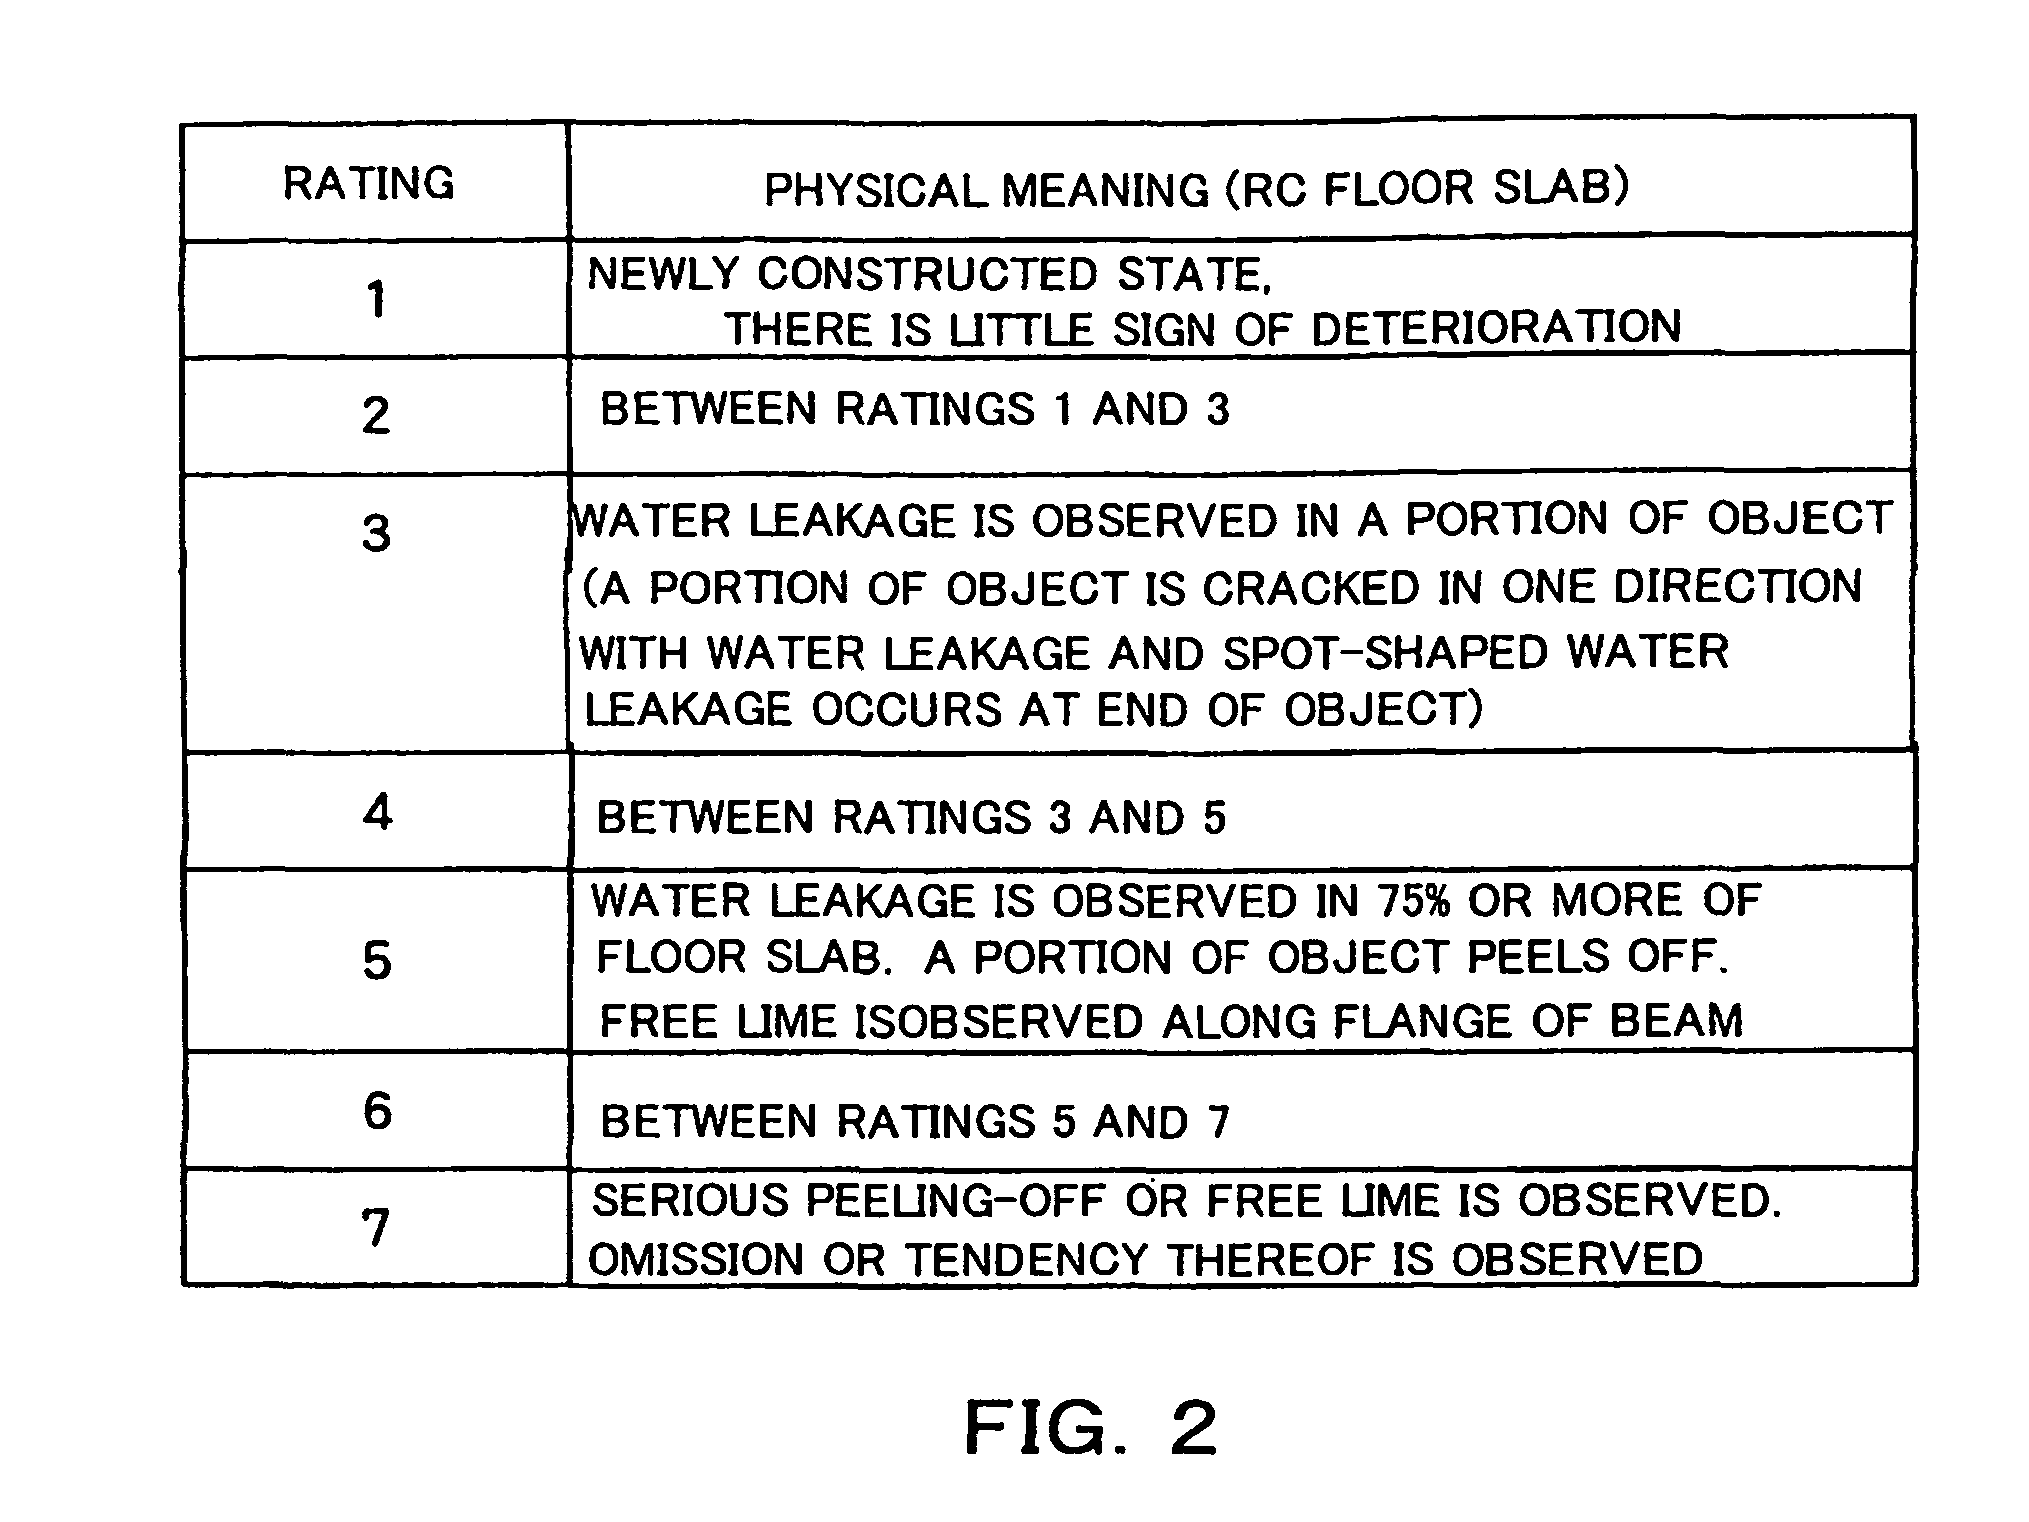 Apparatus and method for evaluating deterioration performance